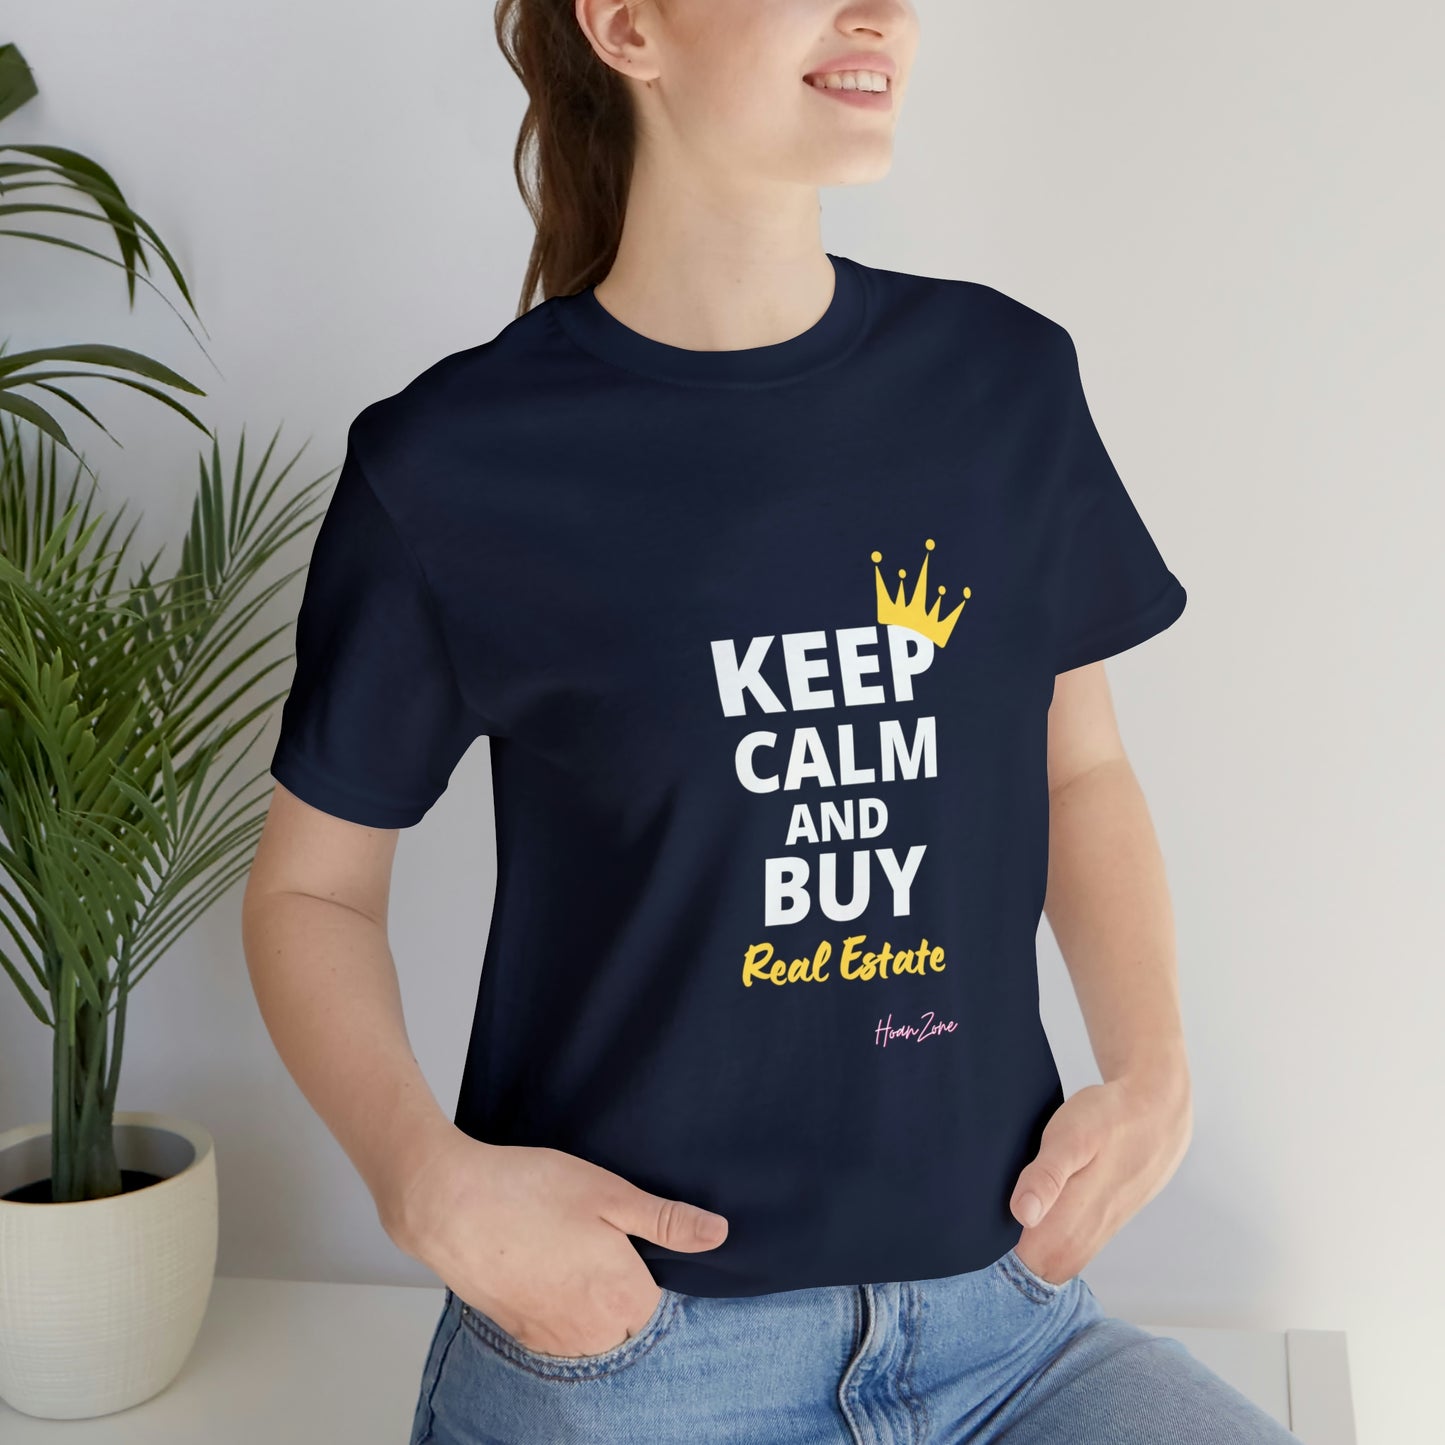 Keep Calm and Buy Real Estate